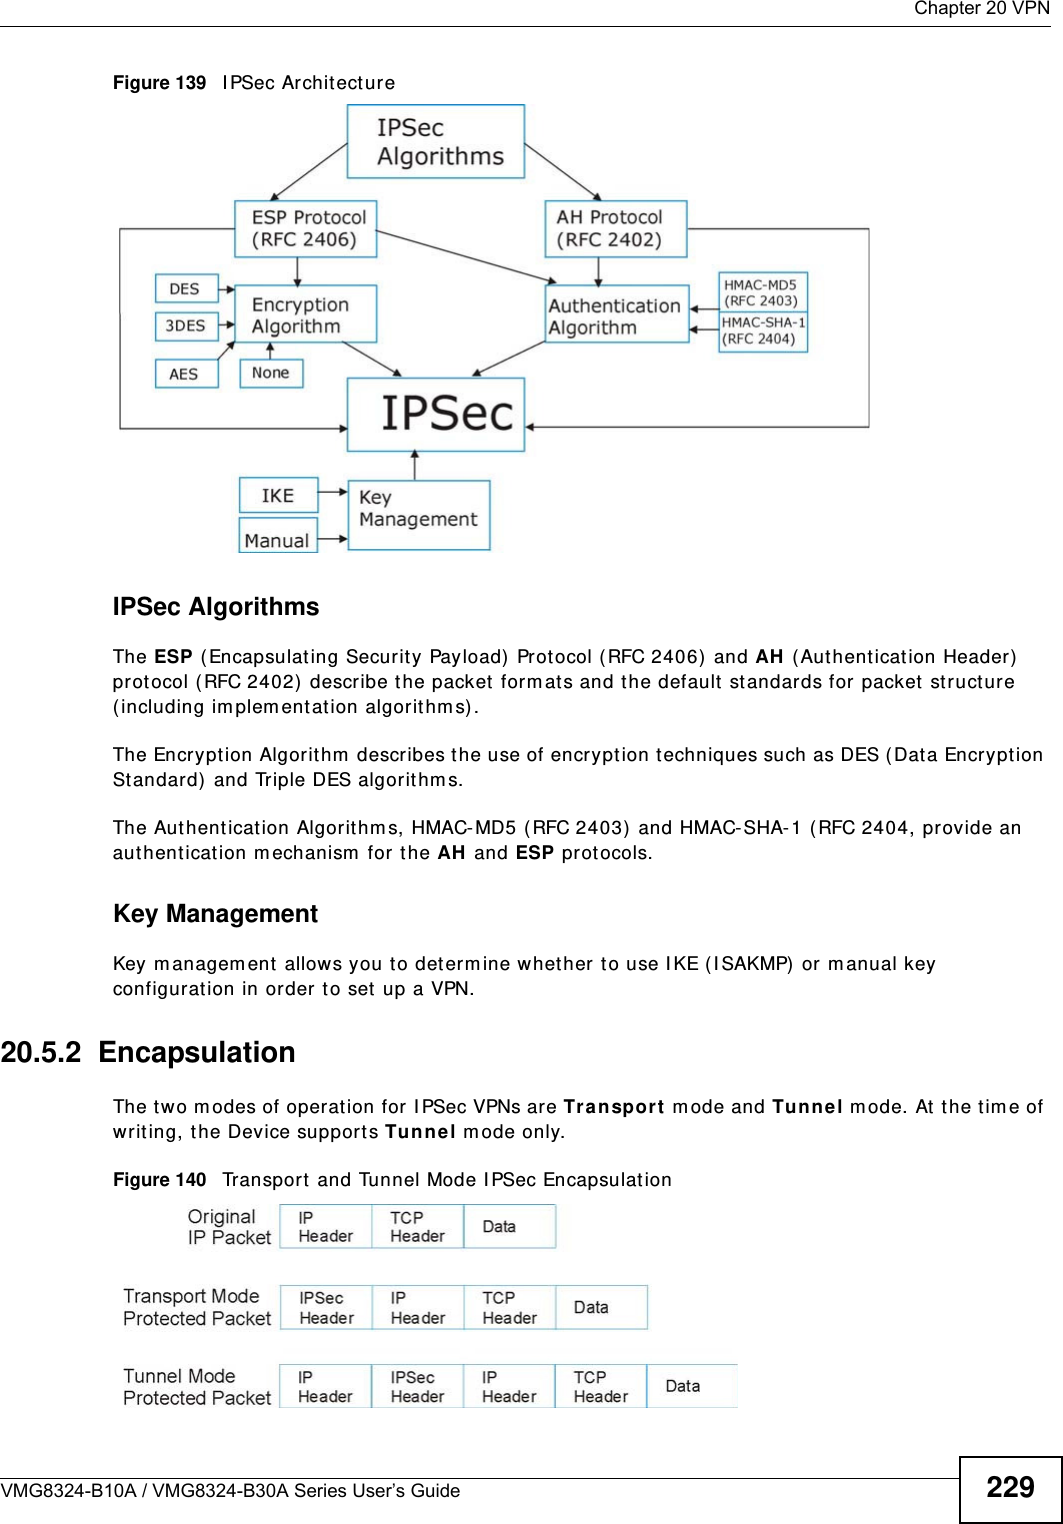  Chapter 20 VPNVMG8324-B10A / VMG8324-B30A Series User’s Guide 229Figure 139   I PSec Archit ect ureIPSec AlgorithmsThe ESP (Encapsulat ing Securit y Payload)  Prot ocol ( RFC 2406)  and AH ( Authenticat ion Header) protocol ( RFC 2402)  describe the packet  form ats and t he default  st andards for packet  struct ur e ( including im plem entat ion algorit hm s).The Encrypt ion Algorit hm  describes the use of encryption techniques such as DES (Dat a Encrypt ion St andard)  and Triple DES algorithm s.The Aut henticat ion Algorithm s, HMAC-MD5 ( RFC 2403)  and HMAC-SHA- 1 (RFC 2404, provide an authent icat ion m echanism  for  t he AH and ESP pr ot ocols. Key ManagementKey m anagem ent allows you t o det erm ine whet her to use I KE (I SAKMP)  or m anual key configurat ion in order to set  up a VPN.20.5.2  EncapsulationThe t wo m odes of operation for I PSec VPNs are Tr a nspo rt  m ode and Tunne l m ode. At the t im e of writ ing, t he Device supports Tunnel m ode only.Figure 140   Transport and Tunnel Mode I PSec Encapsulation